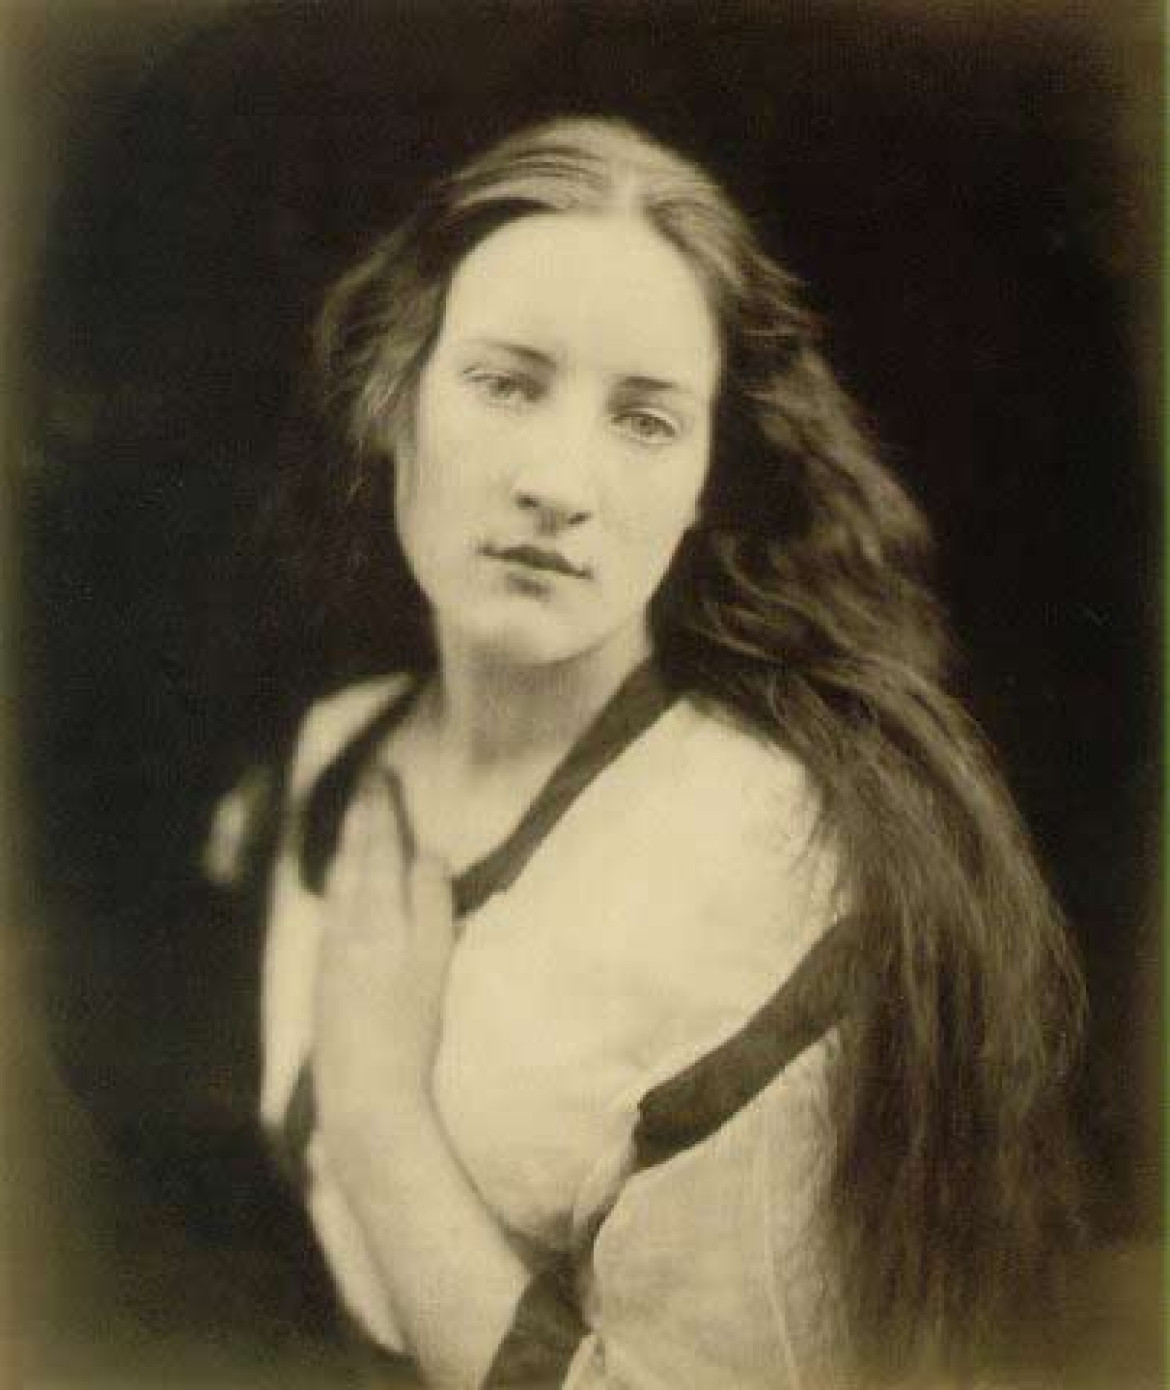 fot. Julia Margaret Cameron "The Echo" 1868 (www.masters-of-photography.com) 